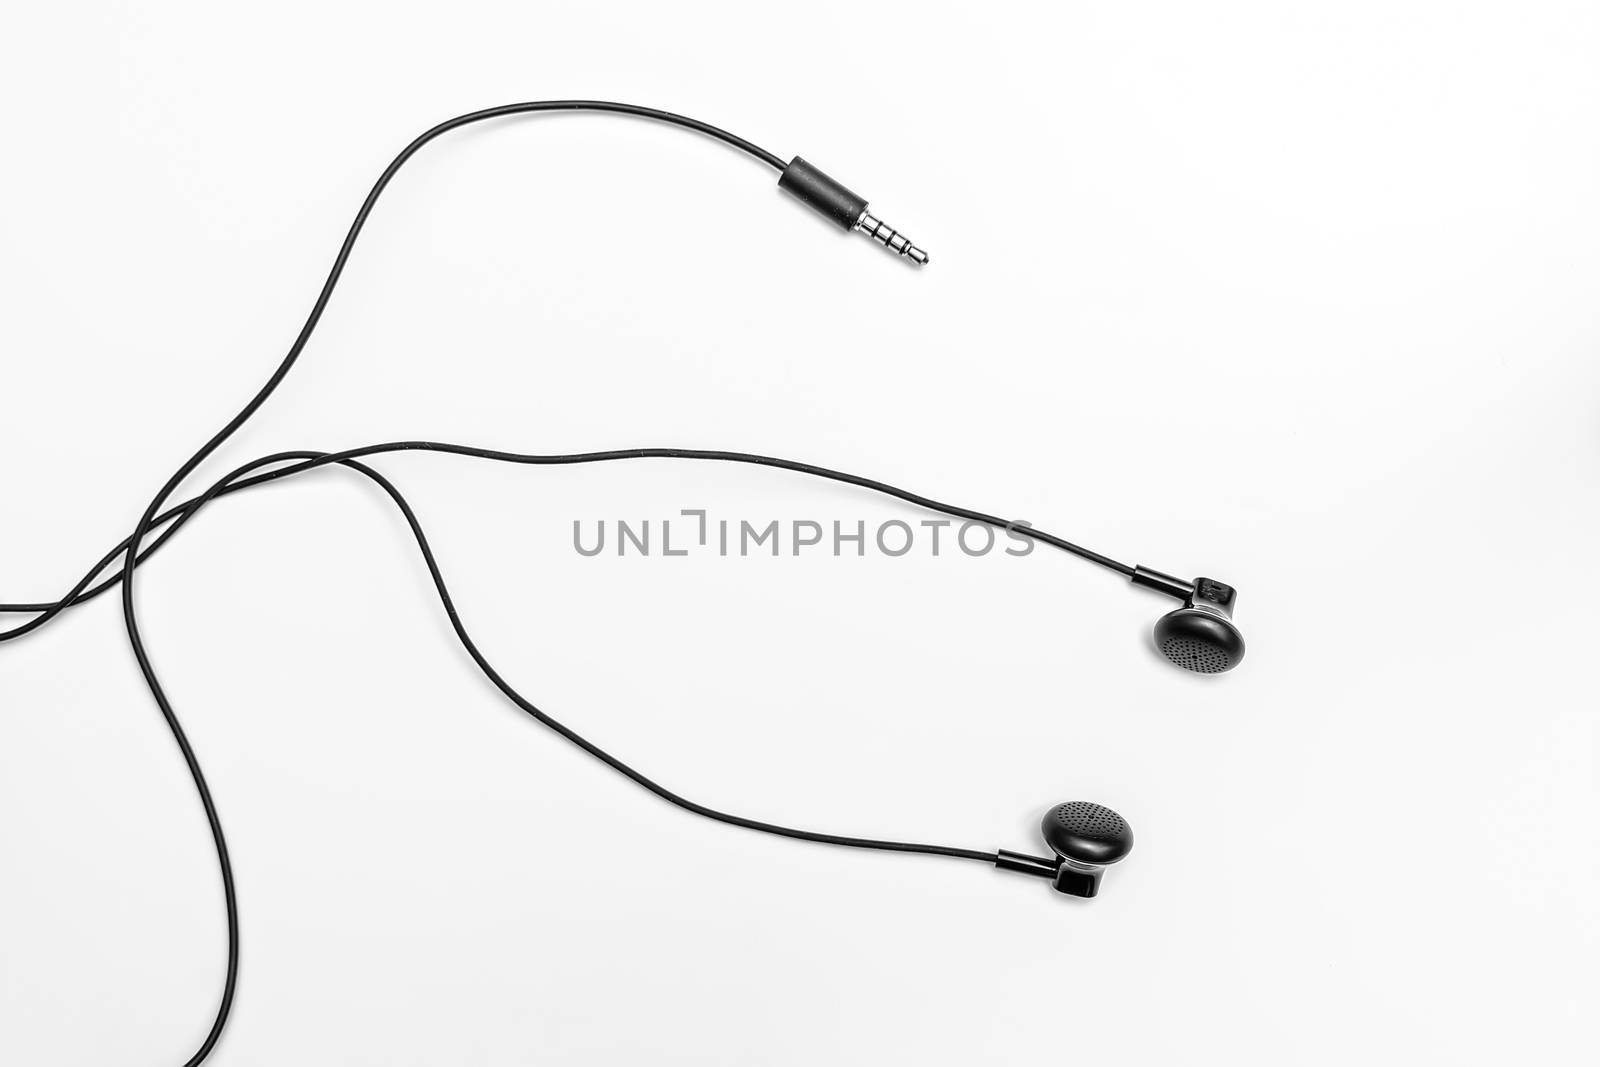 Small black headphones on a light background with tangled long wires